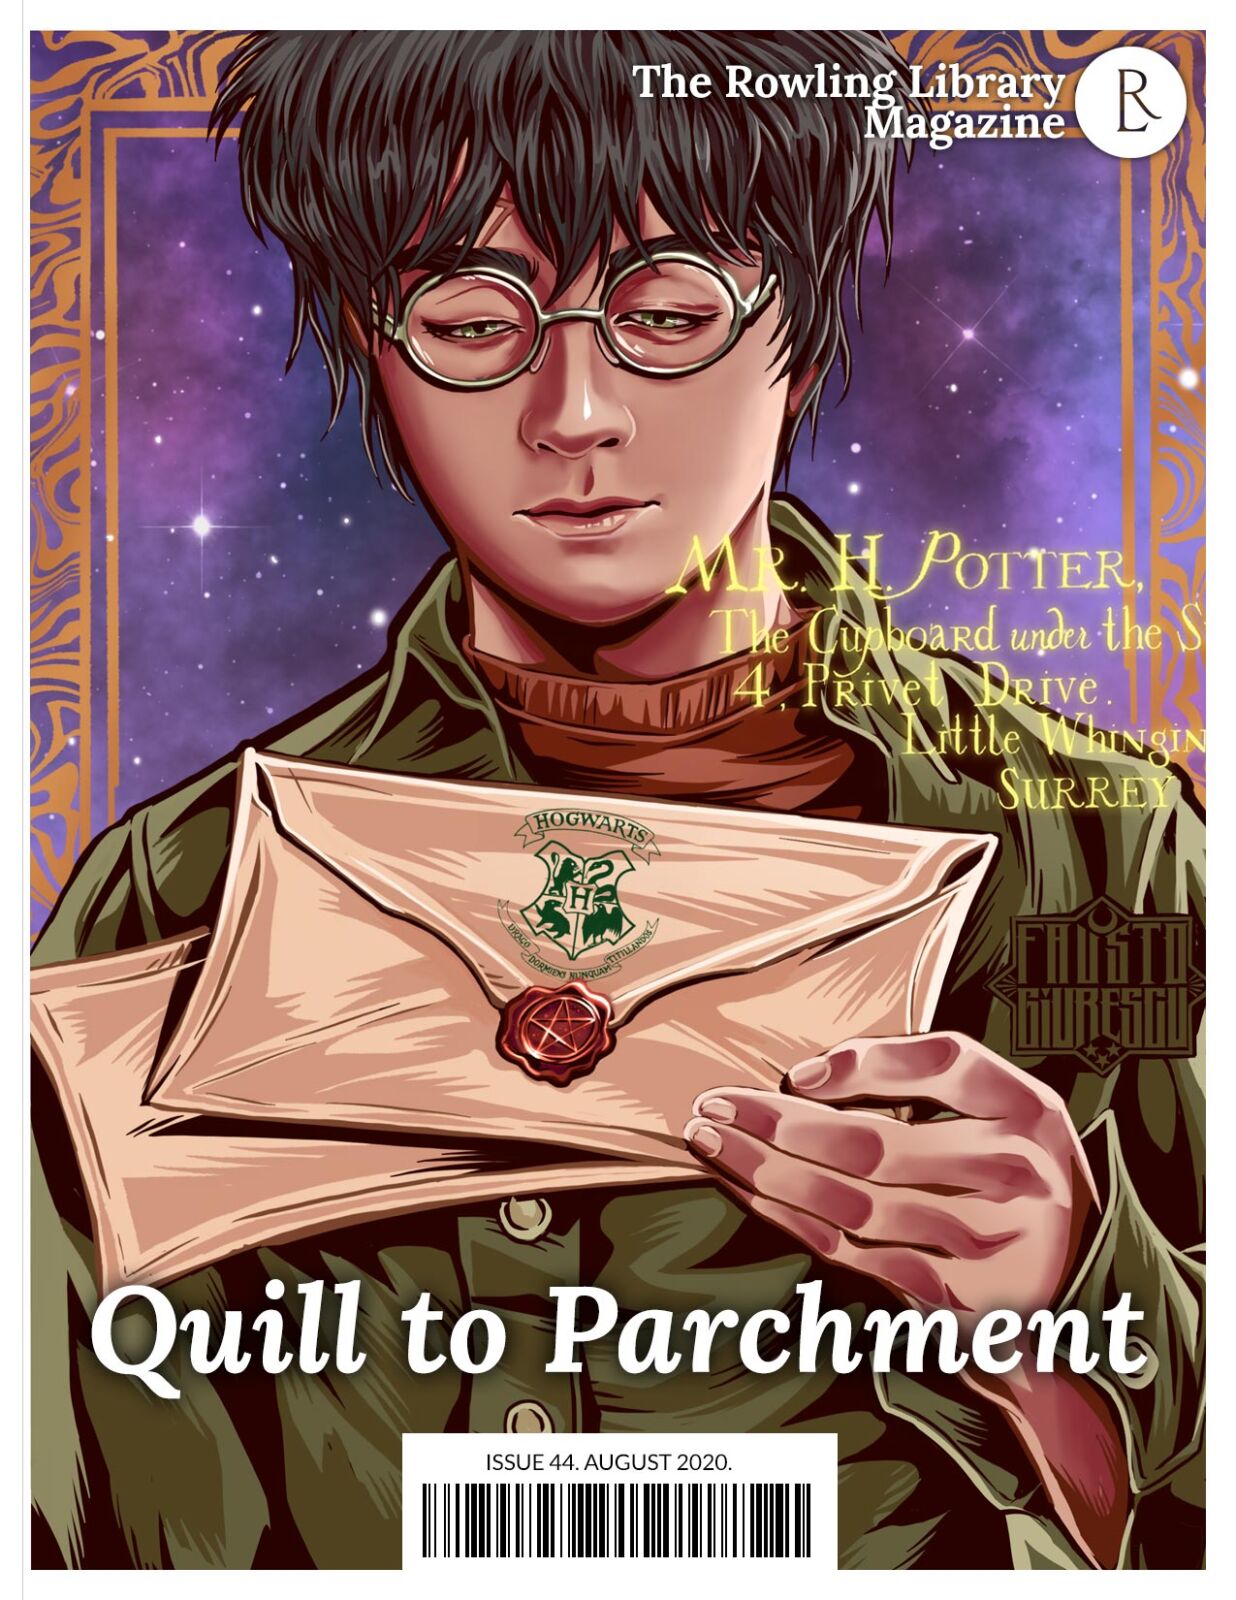 The Rowling Library Magazine #44 (August 2020): Quill to Parchment